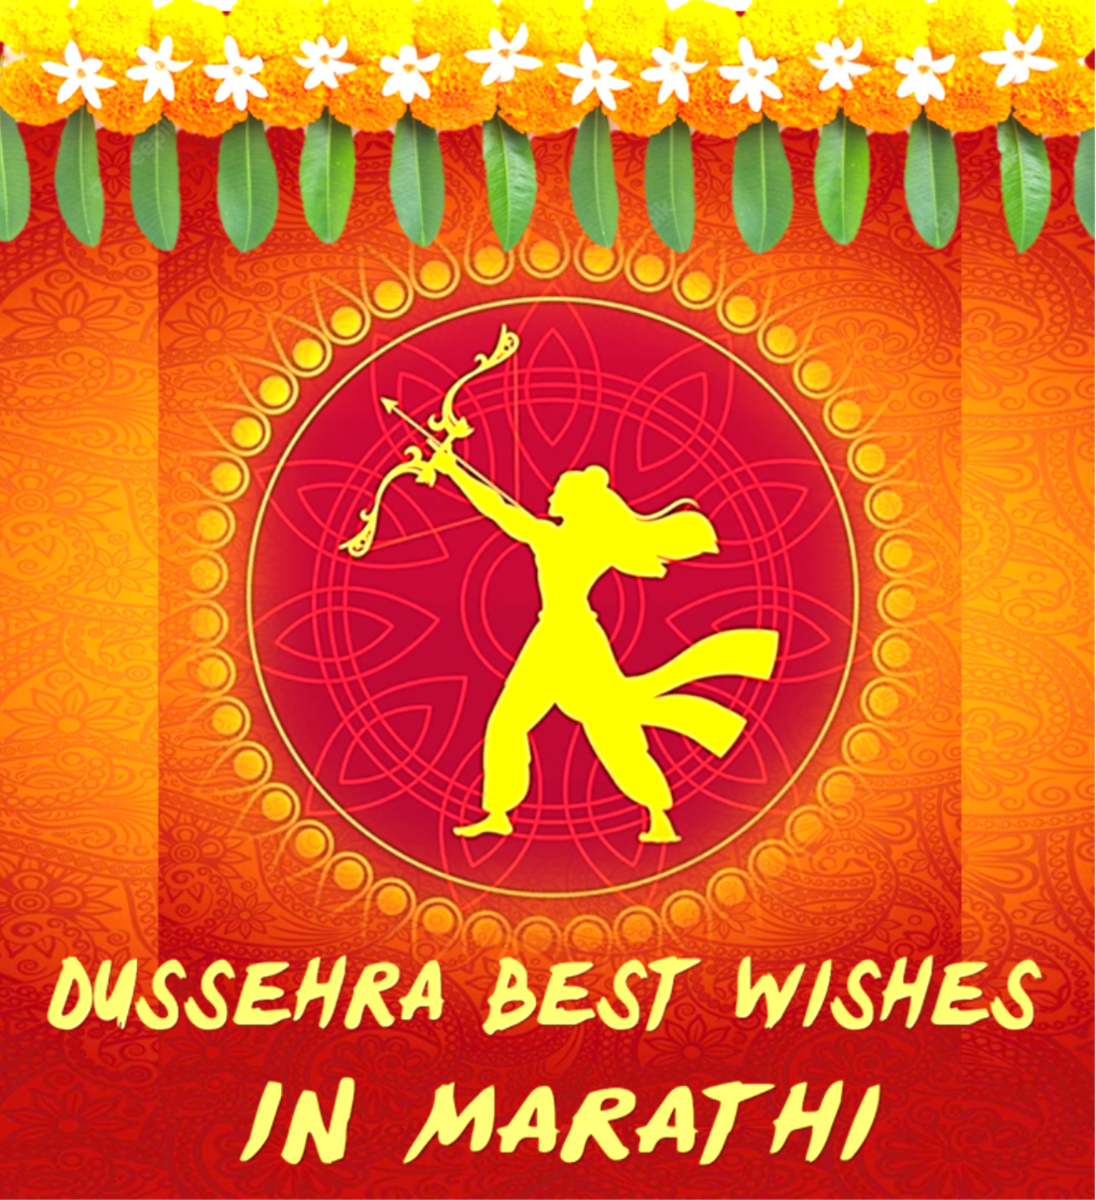 Dussehra (Dasara) Wishes and Greetings in the Marathi Language